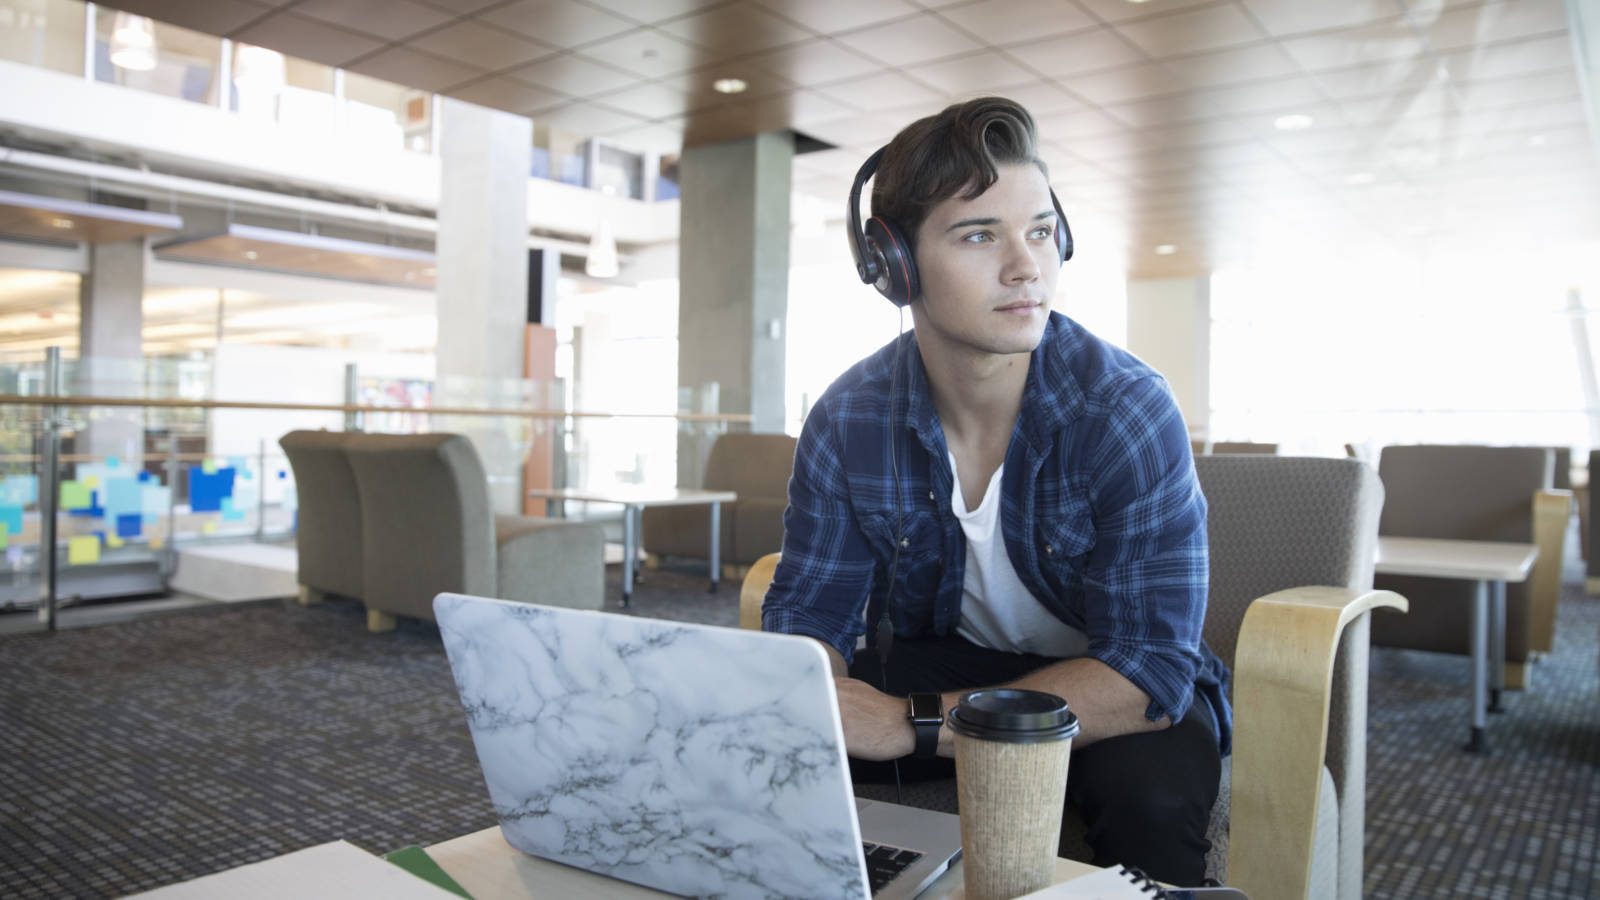 Pensive male college student with headphones listening to music at laptop in student lounge